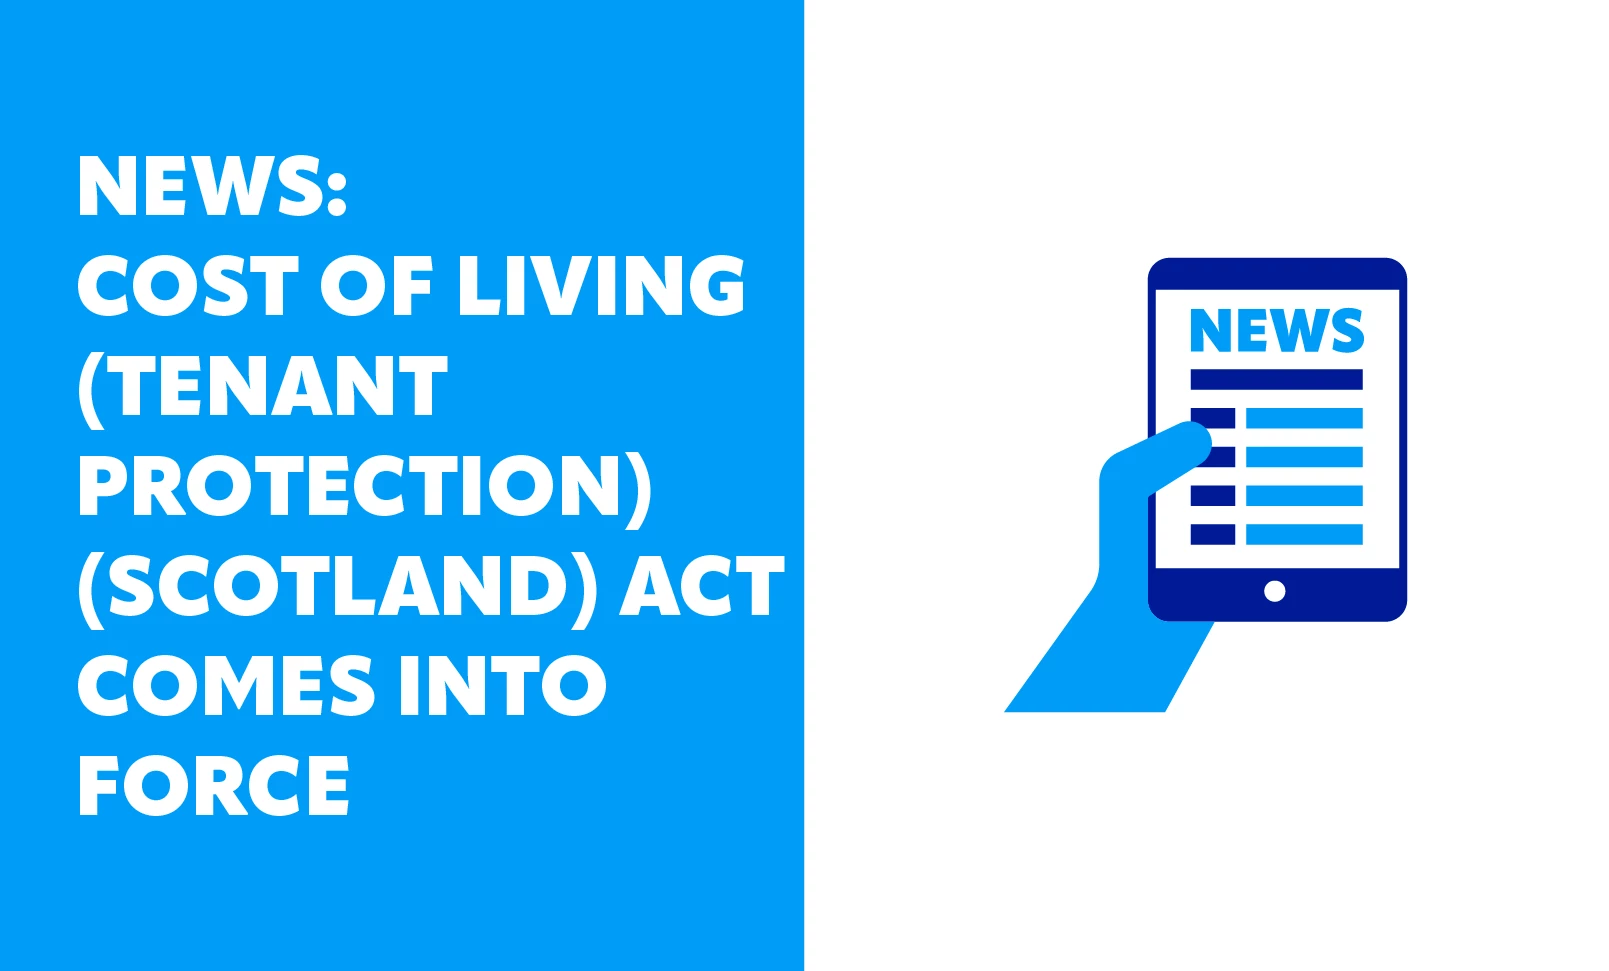 Cost Of Living Act - SafeDeposits Scotland